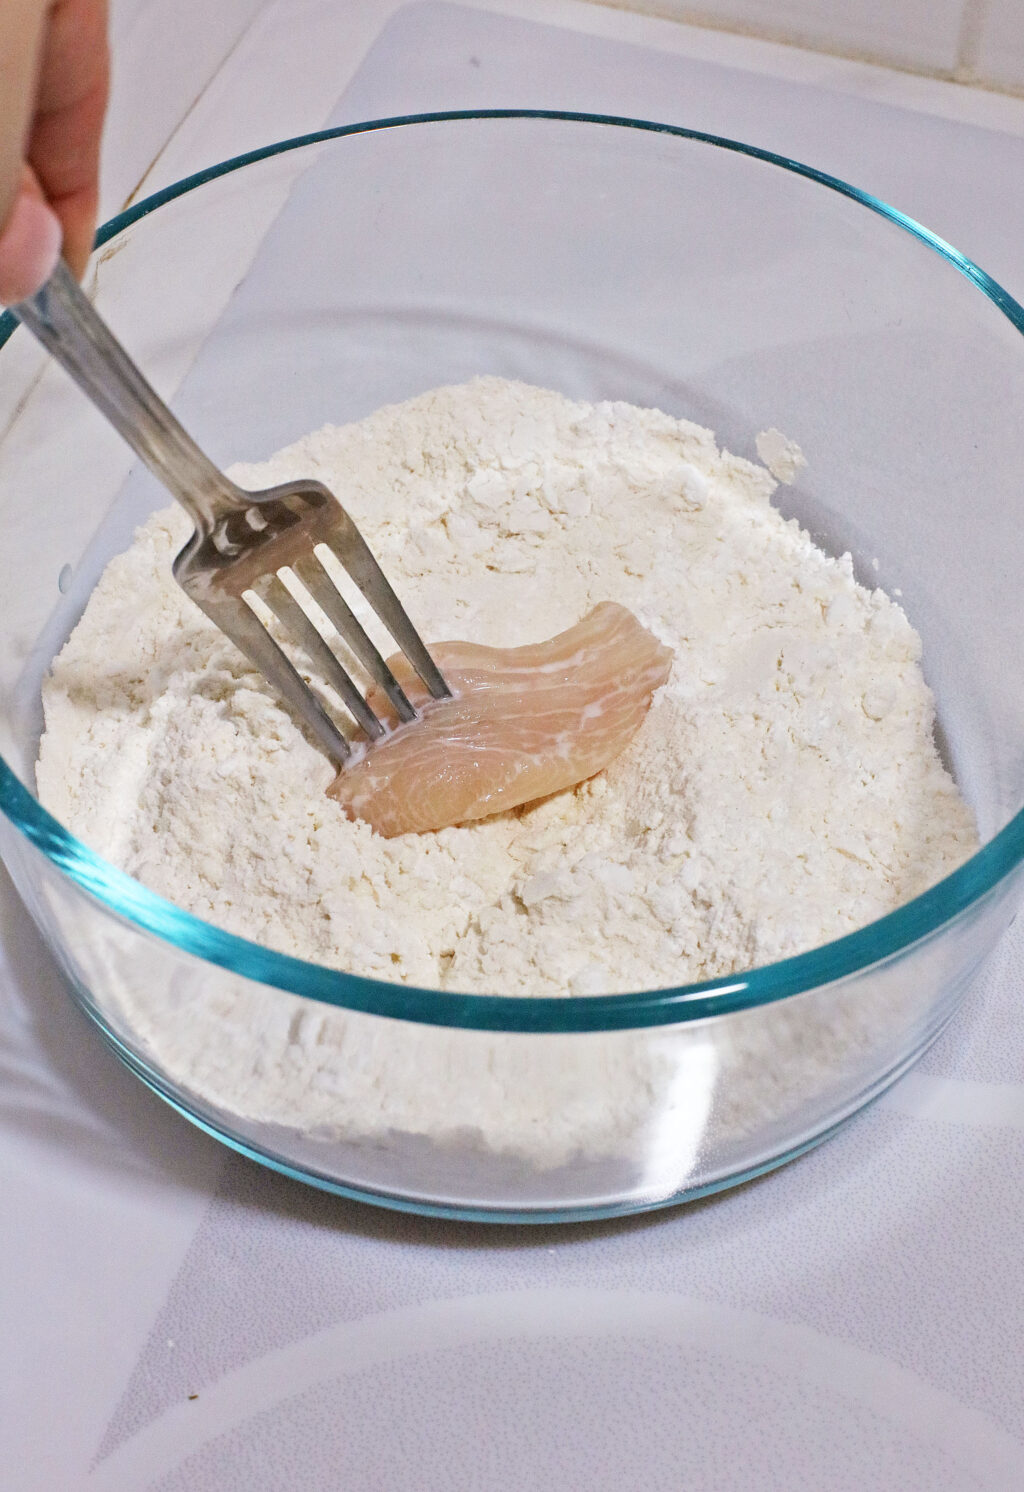 raw chicken nugget being dipped into flour mixture